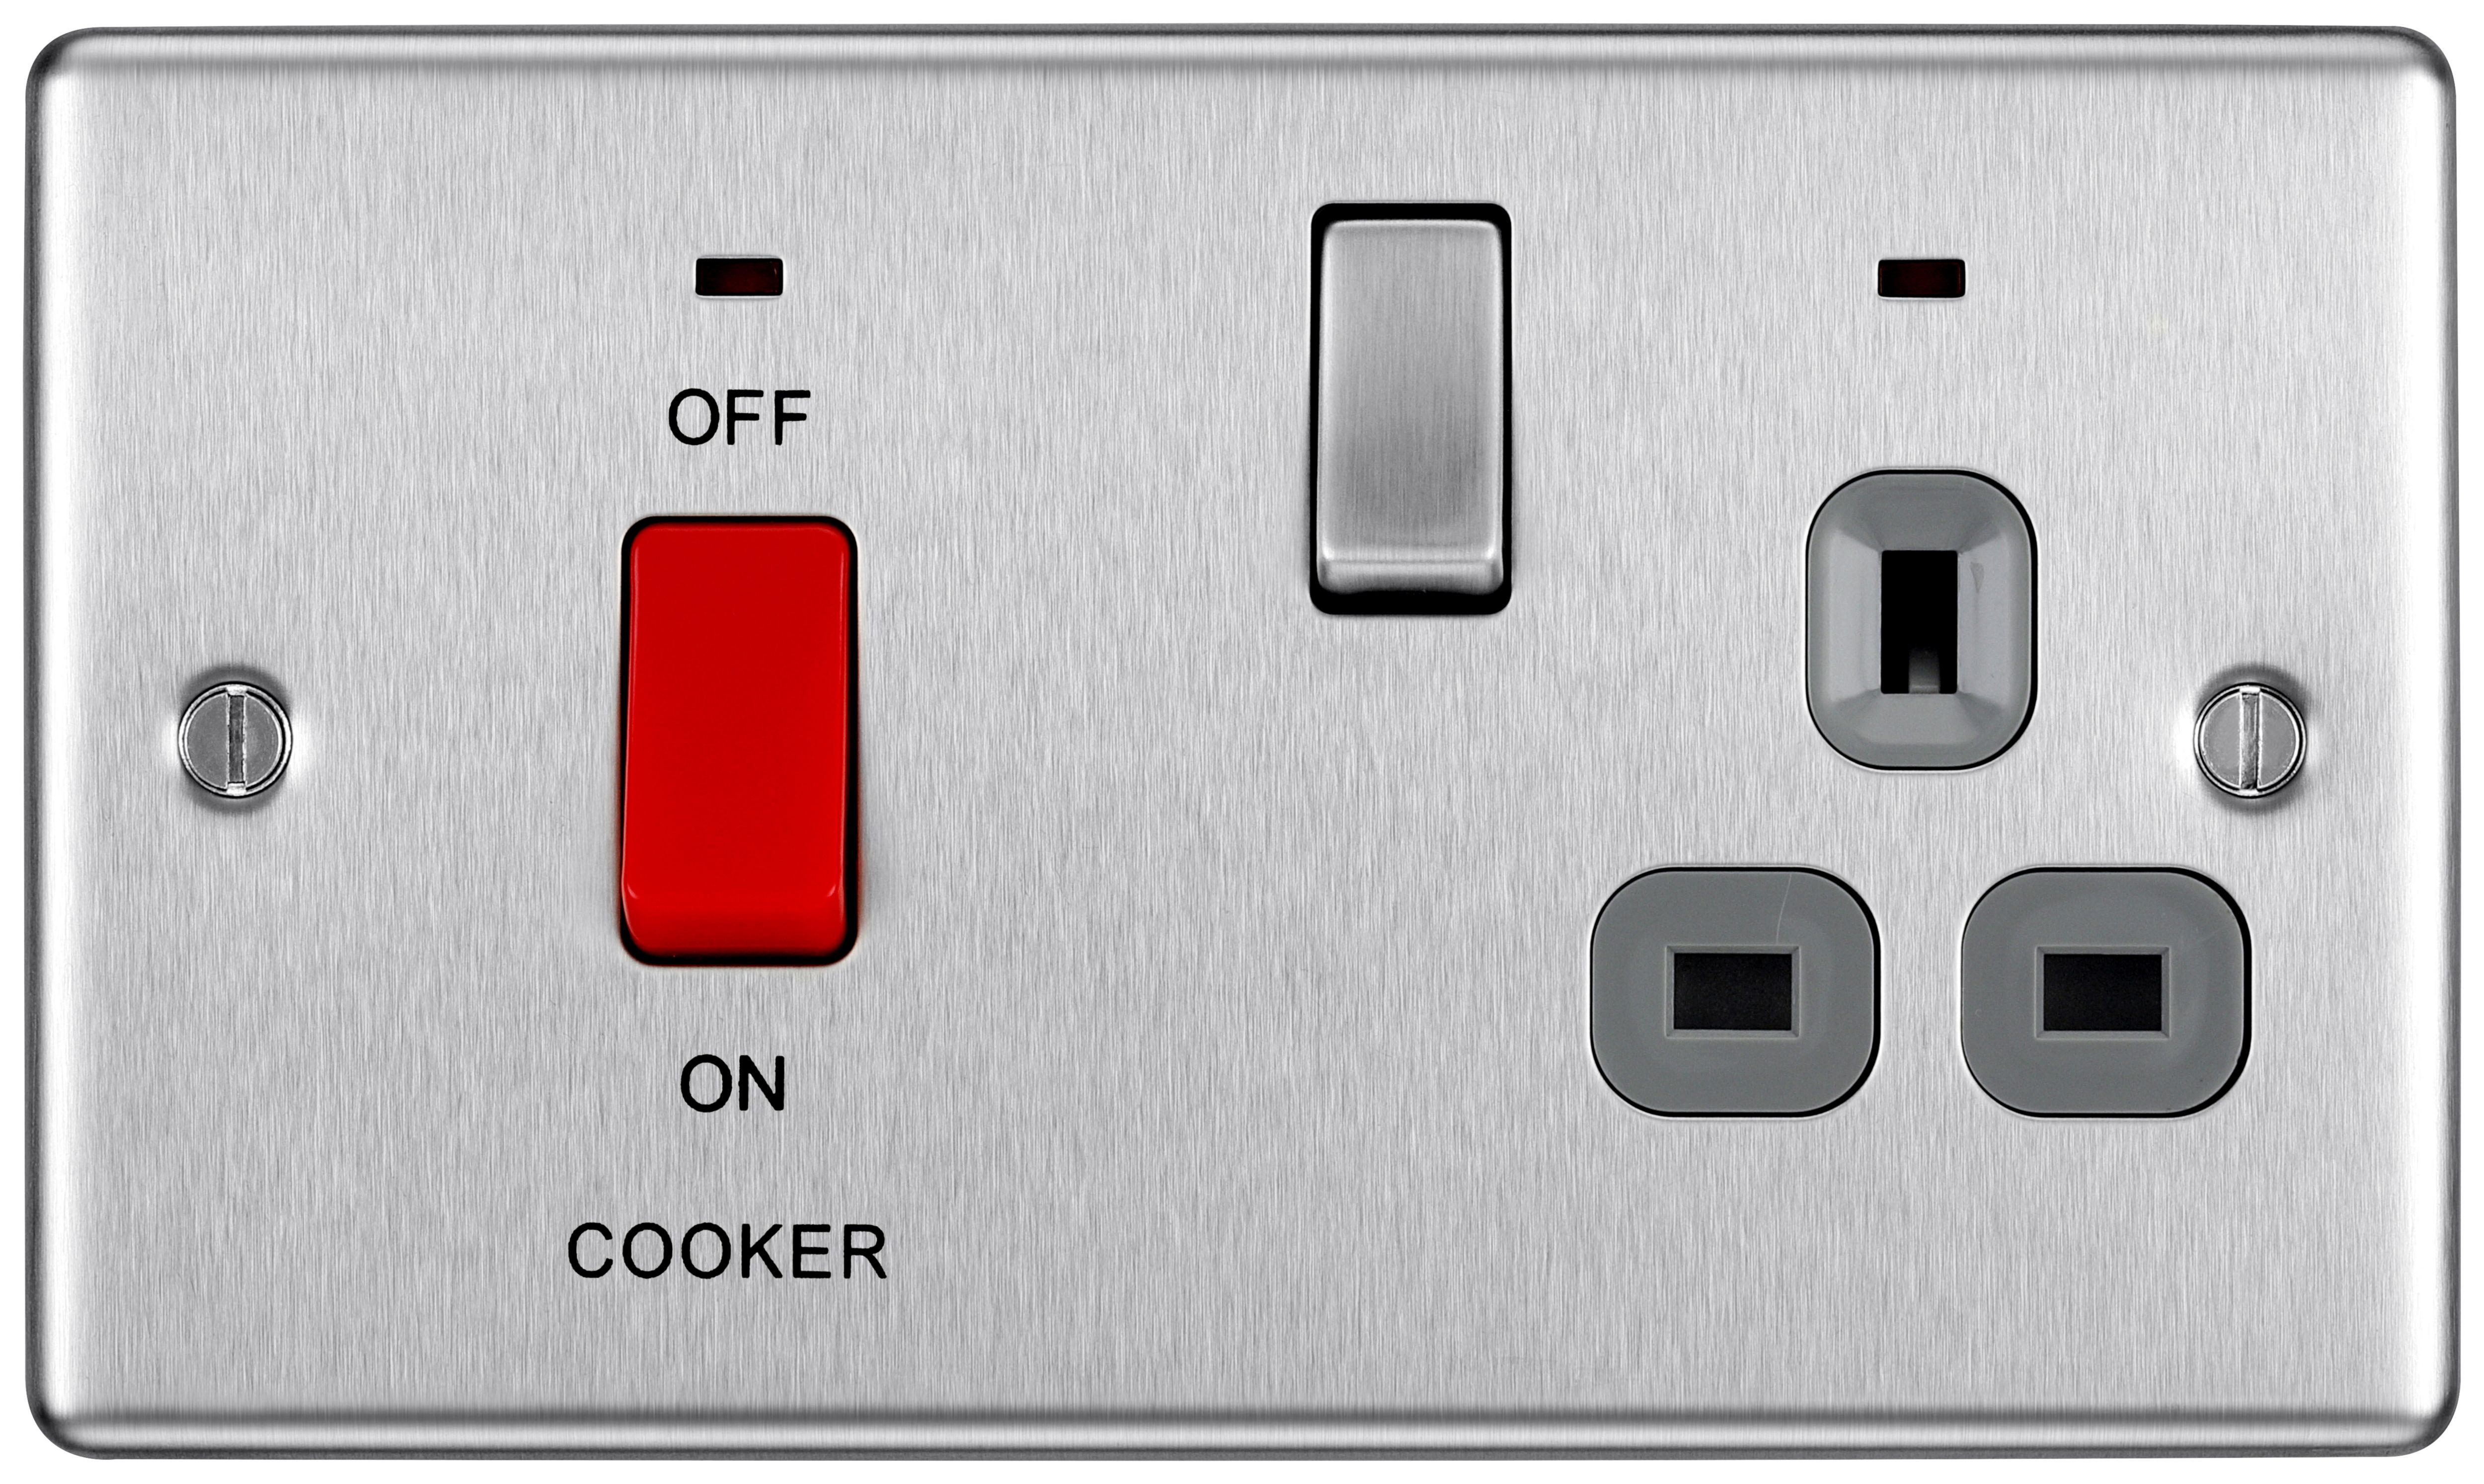 BG 45 Amp Screwed Raised Plate Cooker Control Unit with Switched 13 Amp Power Socket Includes Power Indicators - Brushed Steel